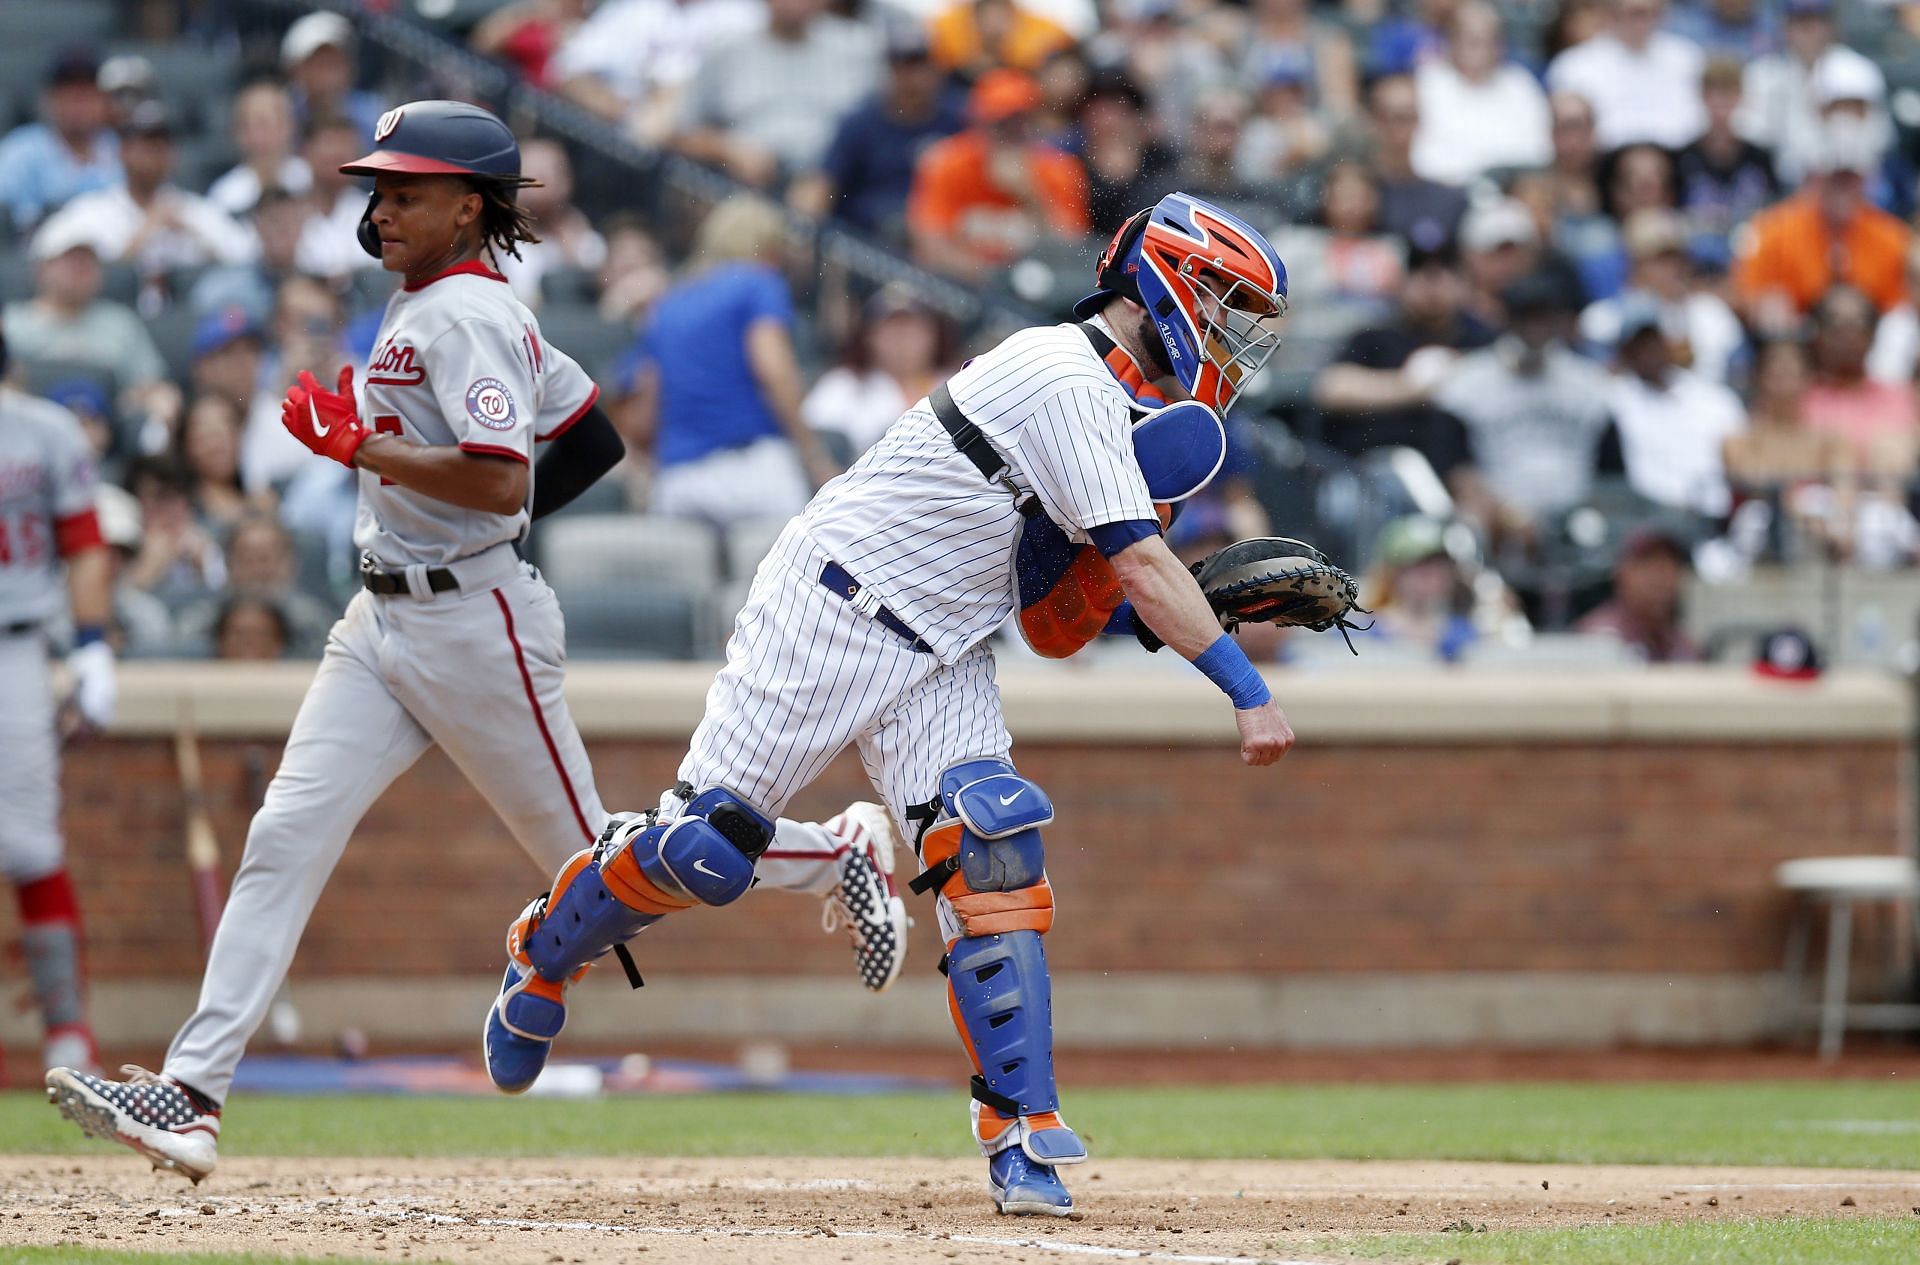 The Washington Nationals got the best of the Mets in their last series